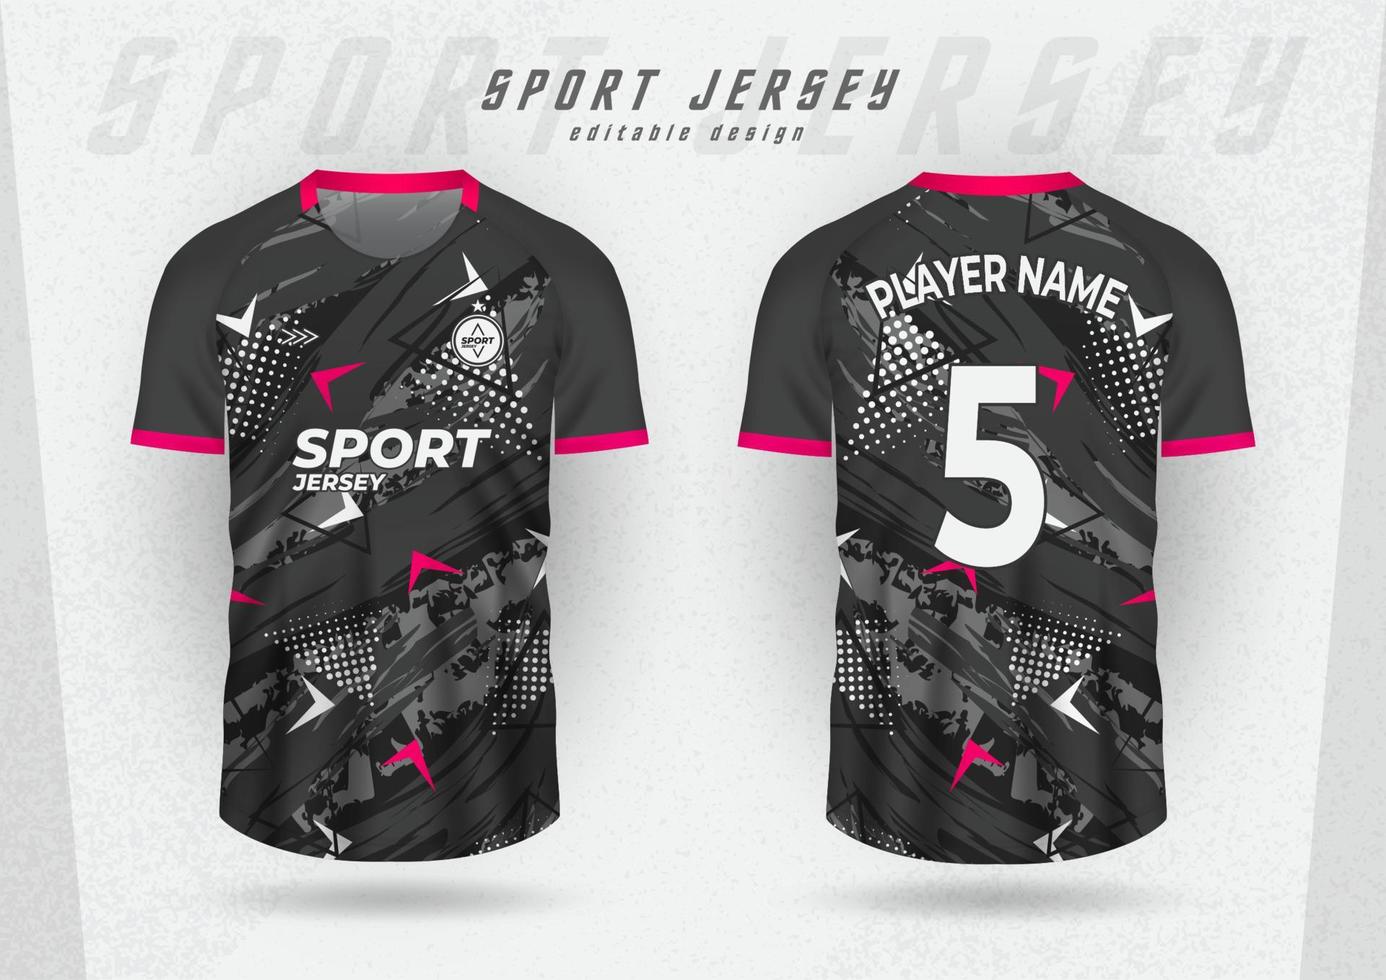 Background template for sports jerseys, racing jerseys, games jerseys, running jerseys, grunge half tone pattern. vector